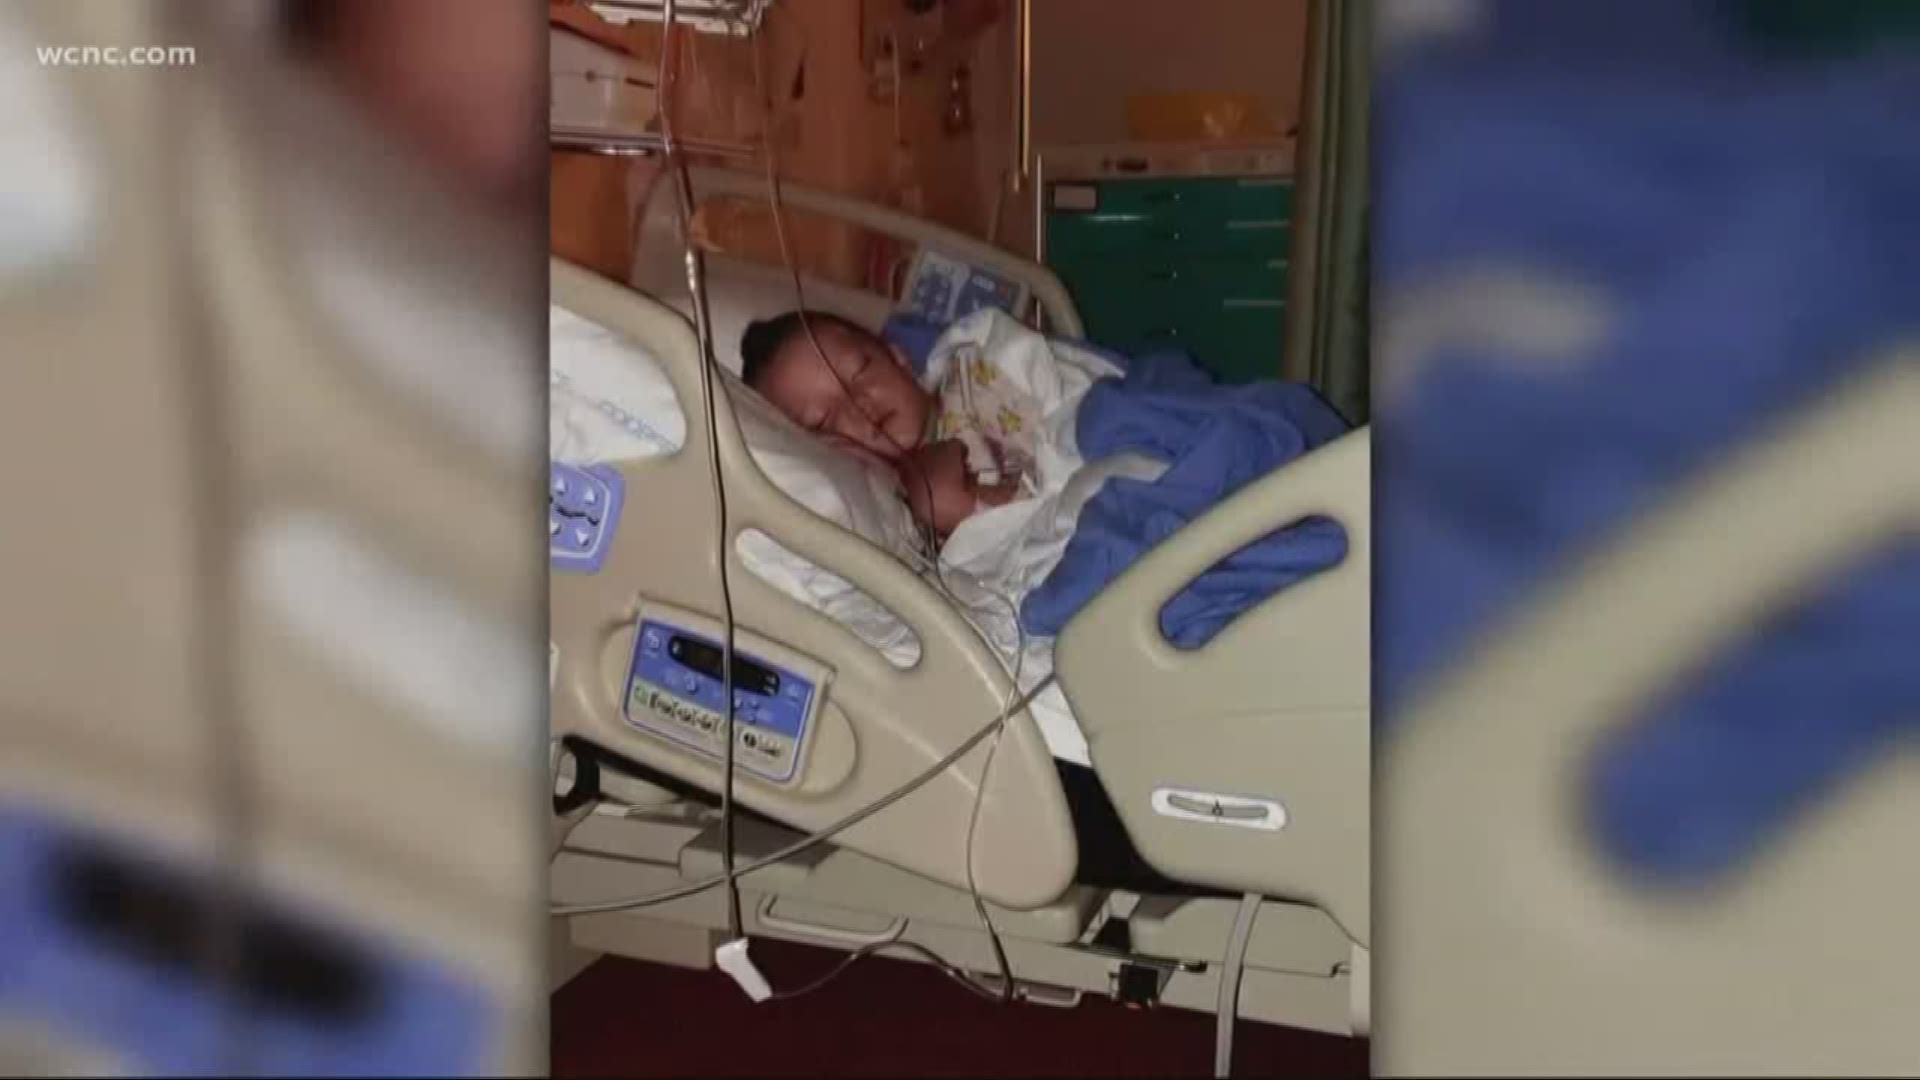 A North Carolina mom is speaking out after a mosquito bite sent her 6-year-old son to the hospital for a week.